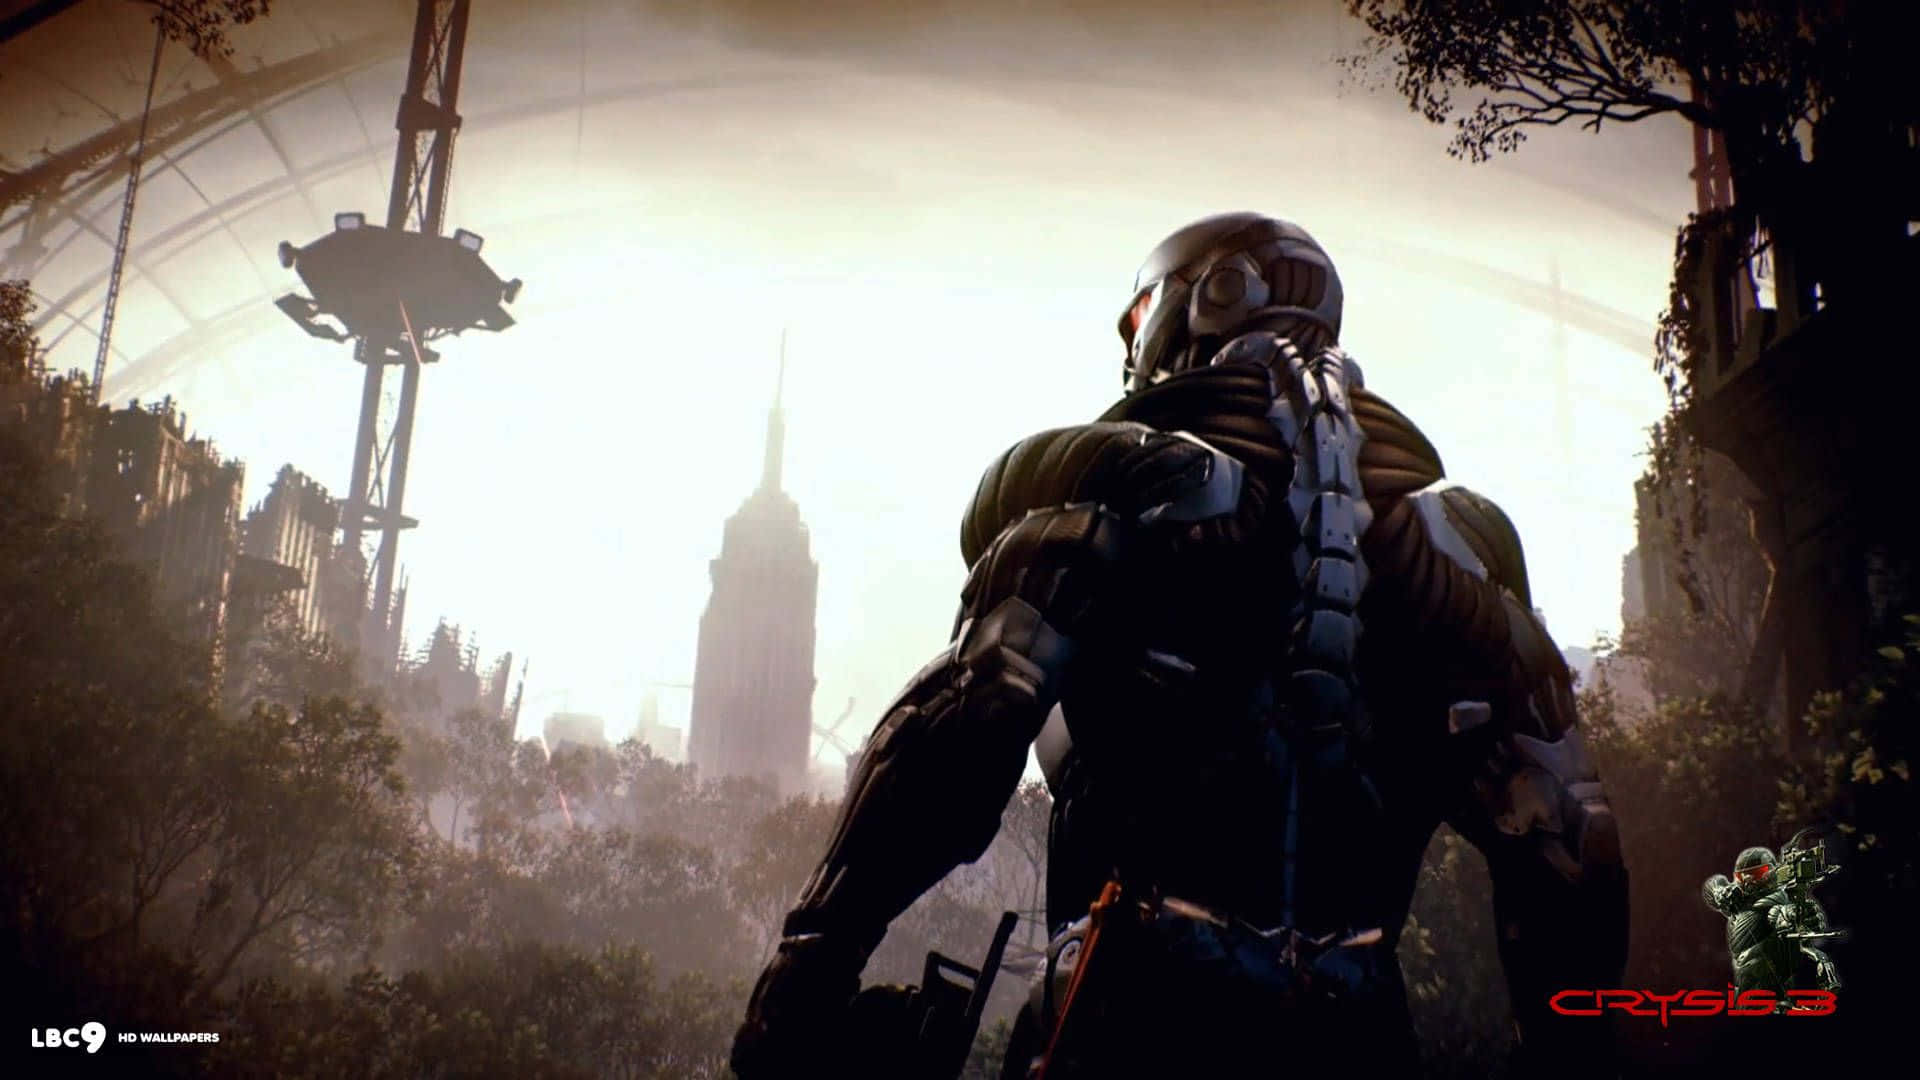 “Explore the majestic cityscapes featured in the video game Crysis 3” Wallpaper